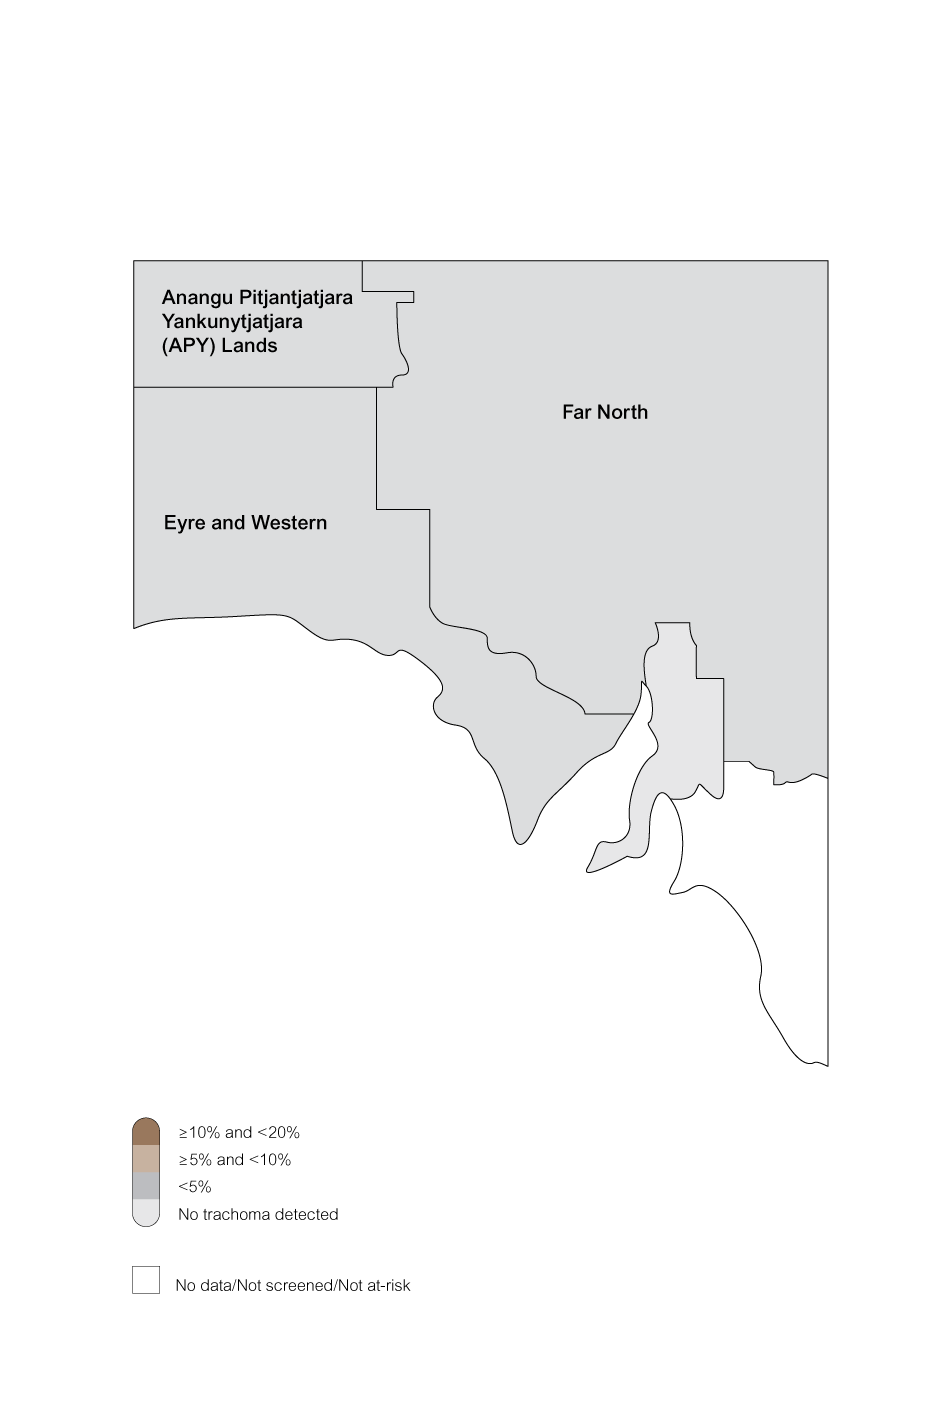 trachoma prevalence in children aged 5-9 years in all at-risk communities by region, south australia, 2016 figure 3.1 is a map of south australia, divided into the 5 regions, to illustrate the trachoma prevalence in children aged 5 to 9 years. three regions indicate there is a prevalence of less than 5% in anangu pitjantjatjara (apy) lands, eyre and western region, and far north region. no trachoma is detected in the southern central region, and there was no data for the south eastern region.